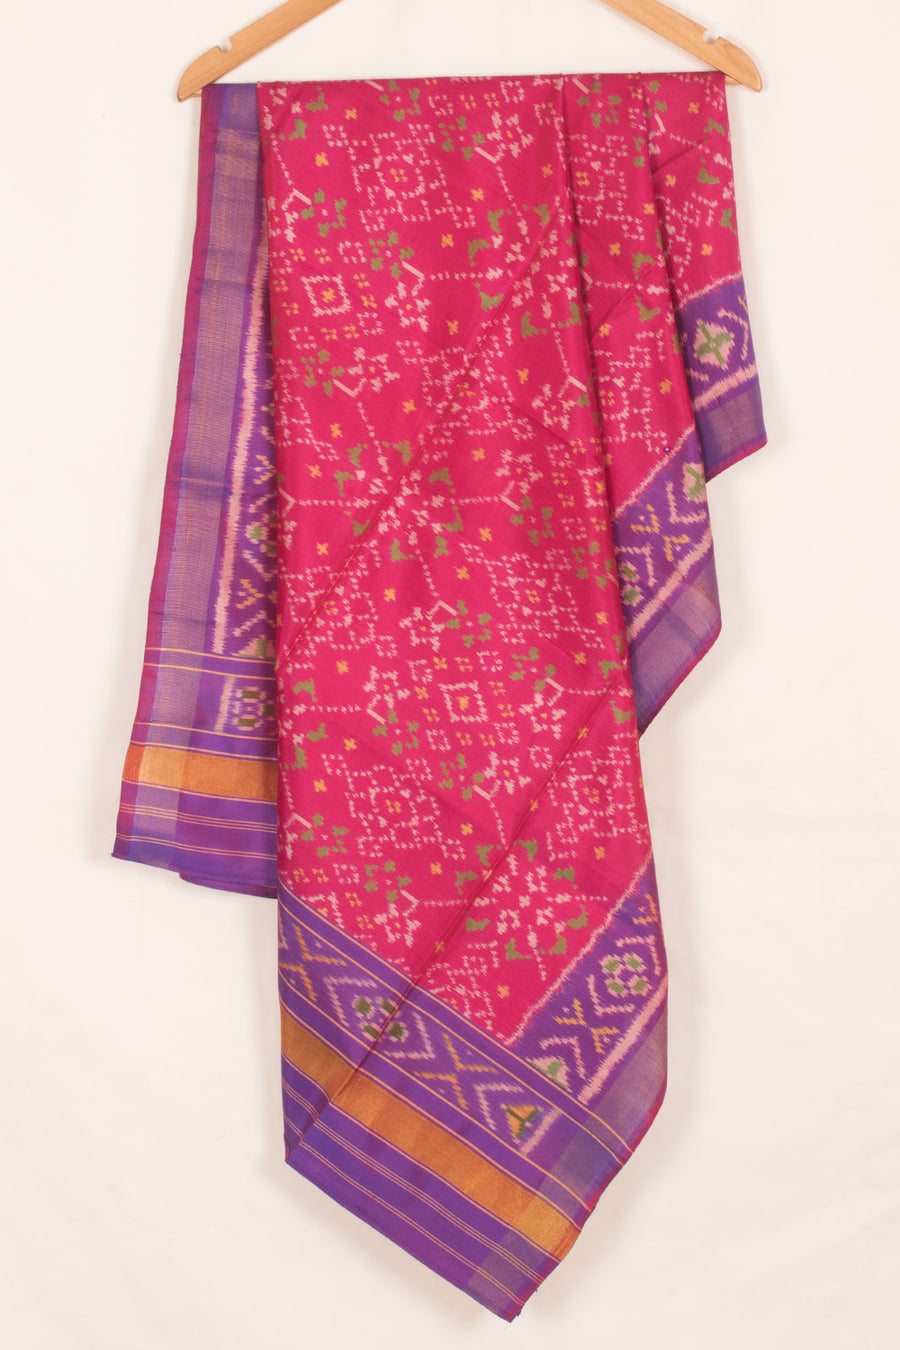 Handcrafted Patola Ikat Mulberry Silk Dupatta with Tissue Border